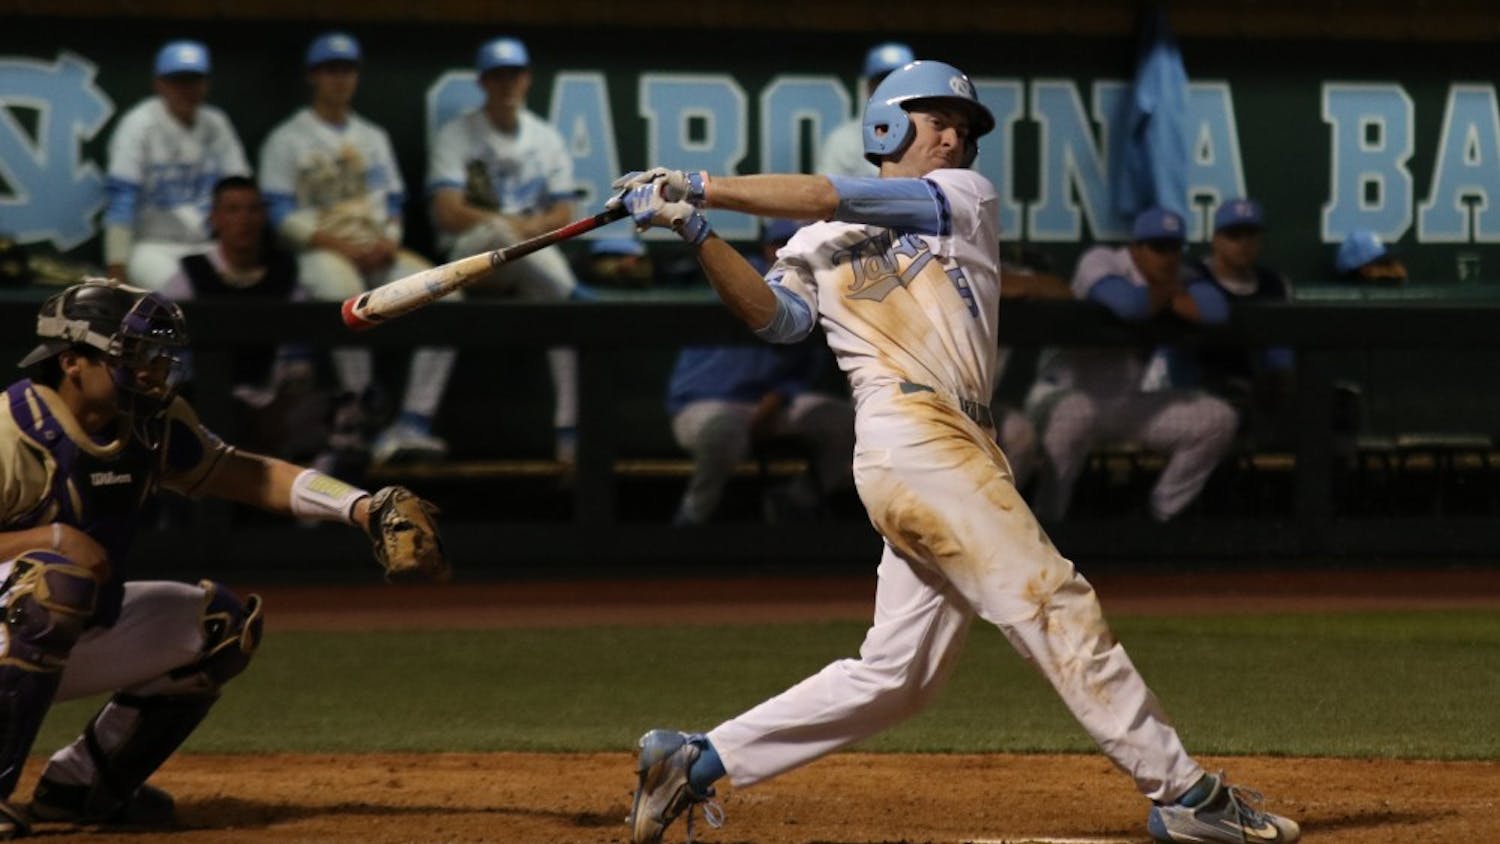 First baseman Ryan Miller (5) follow through on  swing in the bottom of the seventh inning during the North Carolina baseball team's 10-2 route of Western Carolina University on Tuesday.